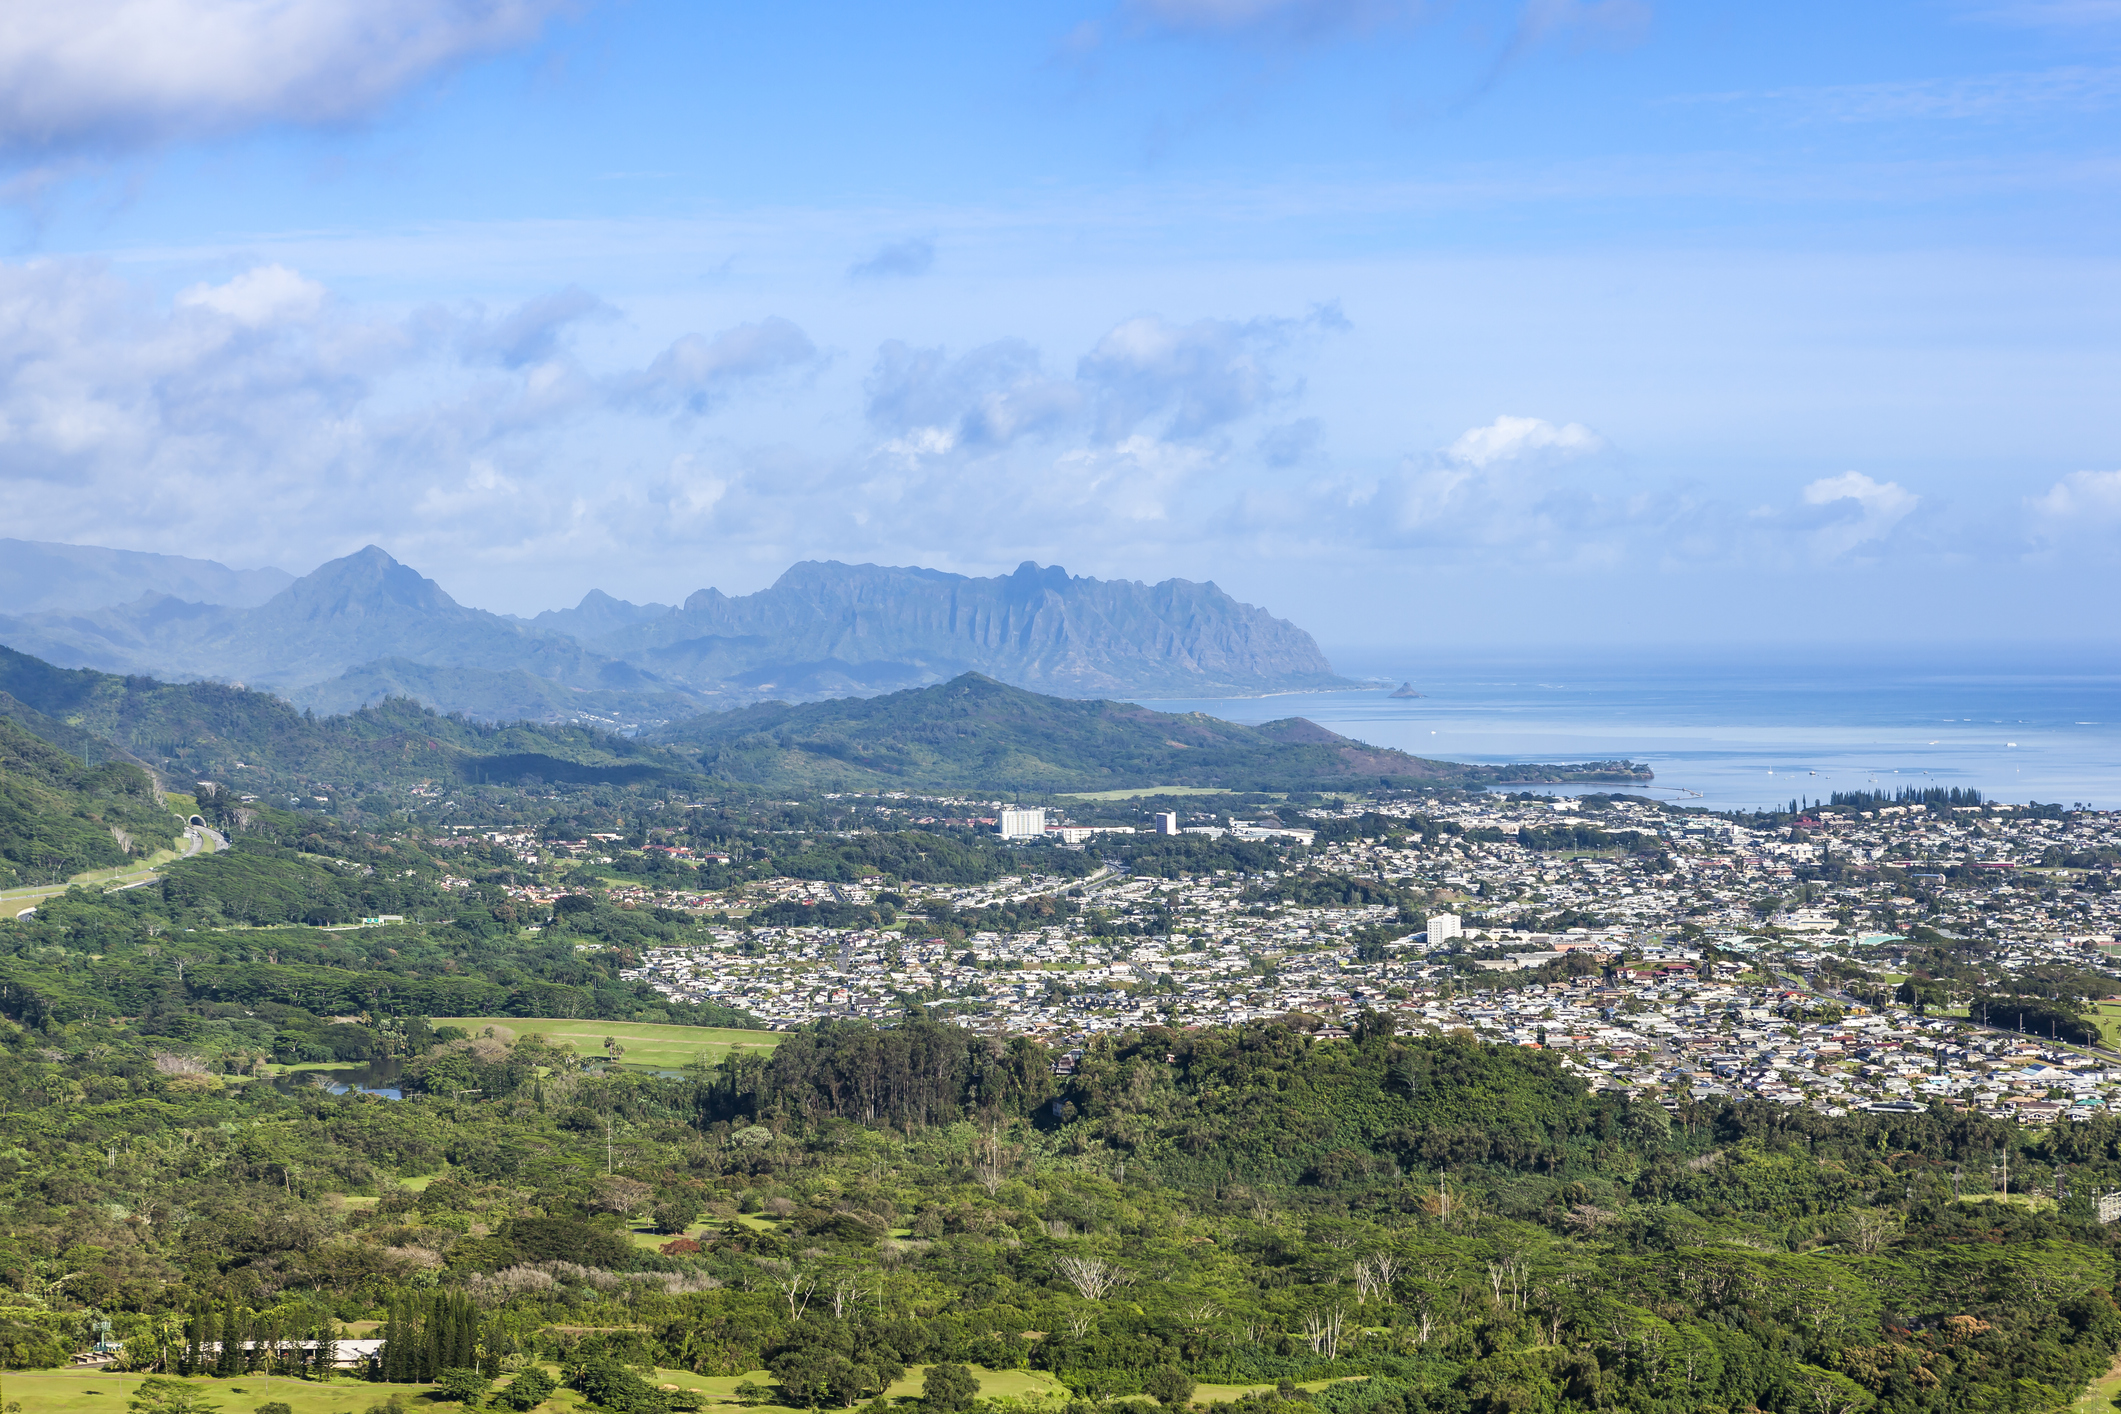 Panoramic view of Oahu from Pali lookout, Hawaii islands